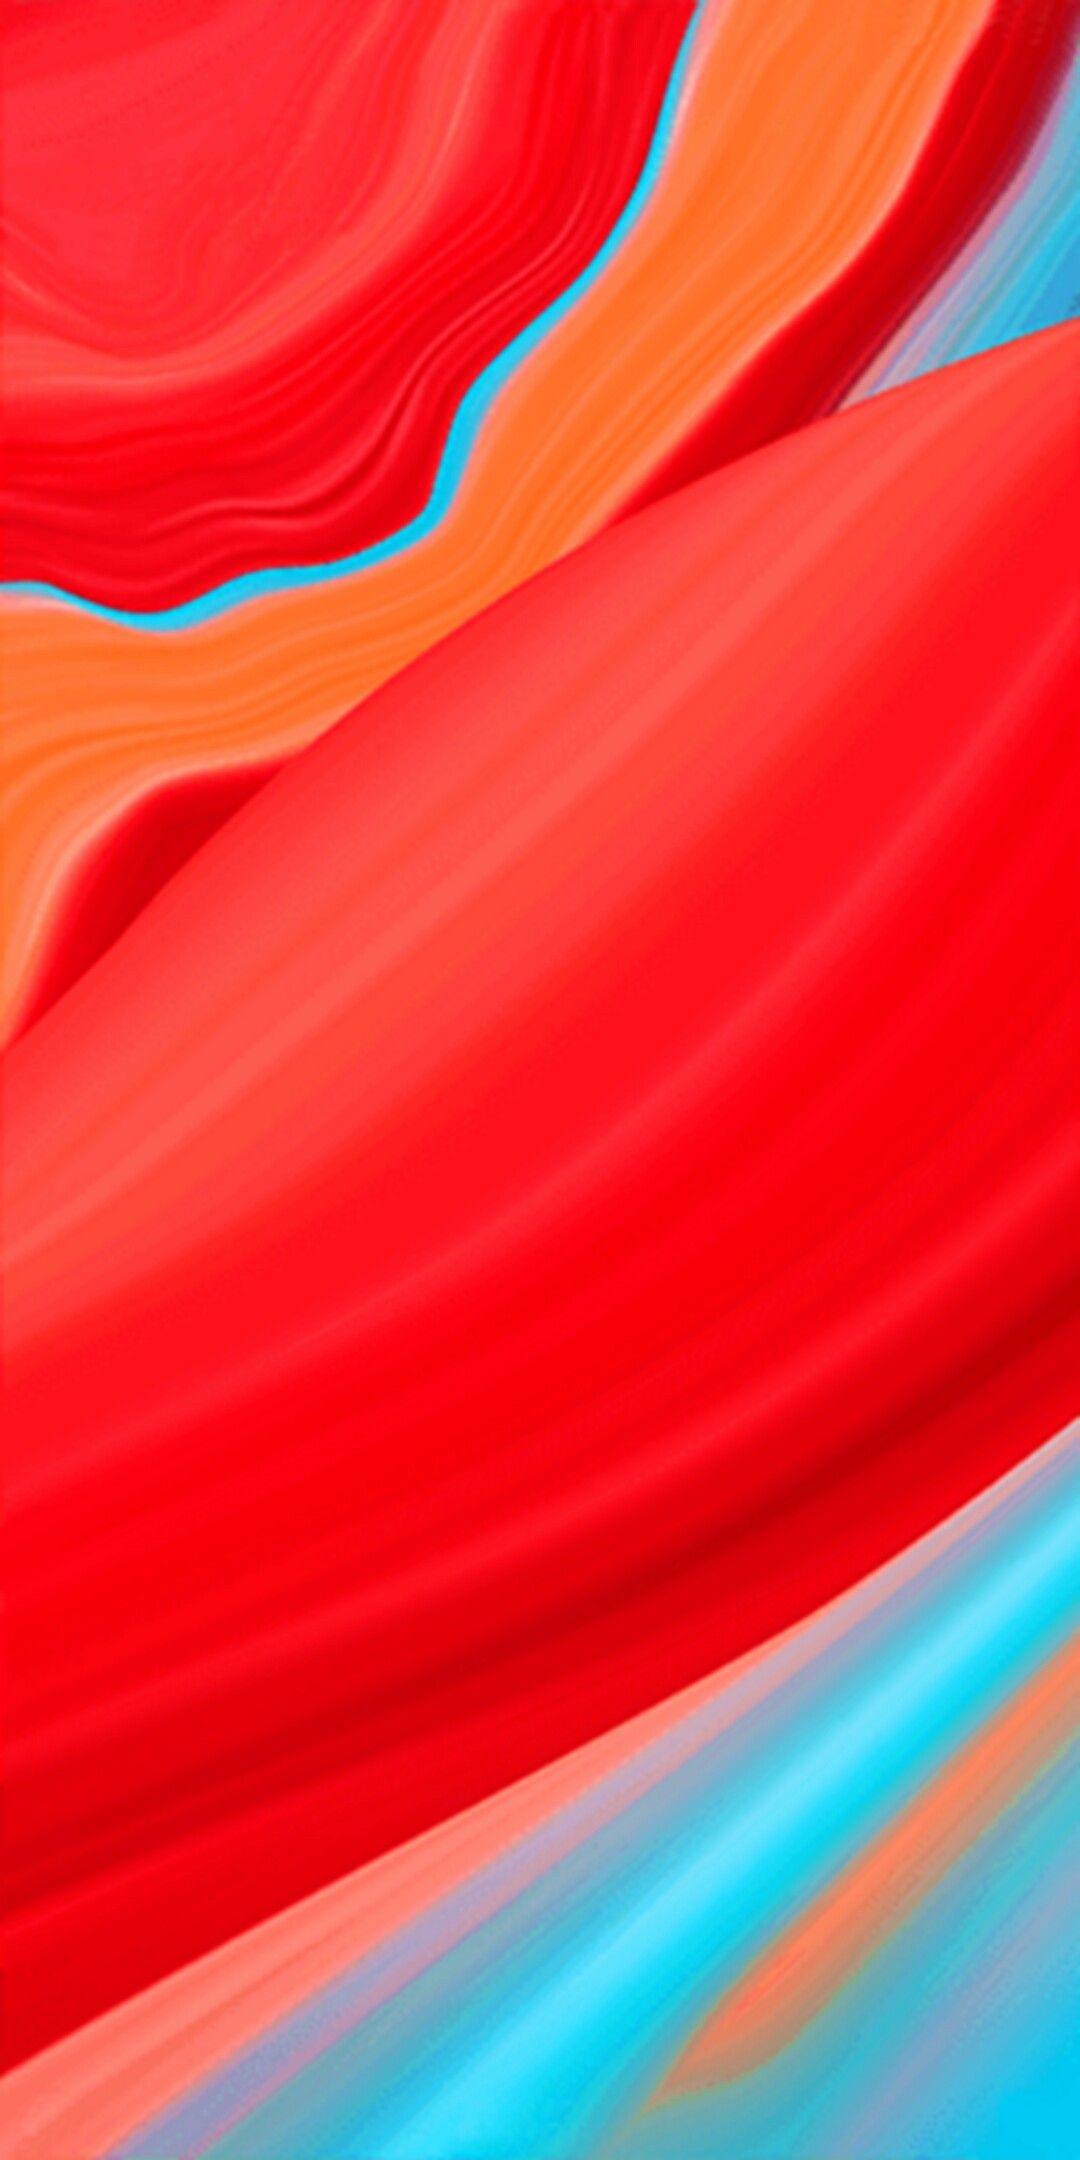 Xiaomi Redmi S2. Square. Abstract iphone wallpaper, iPhone